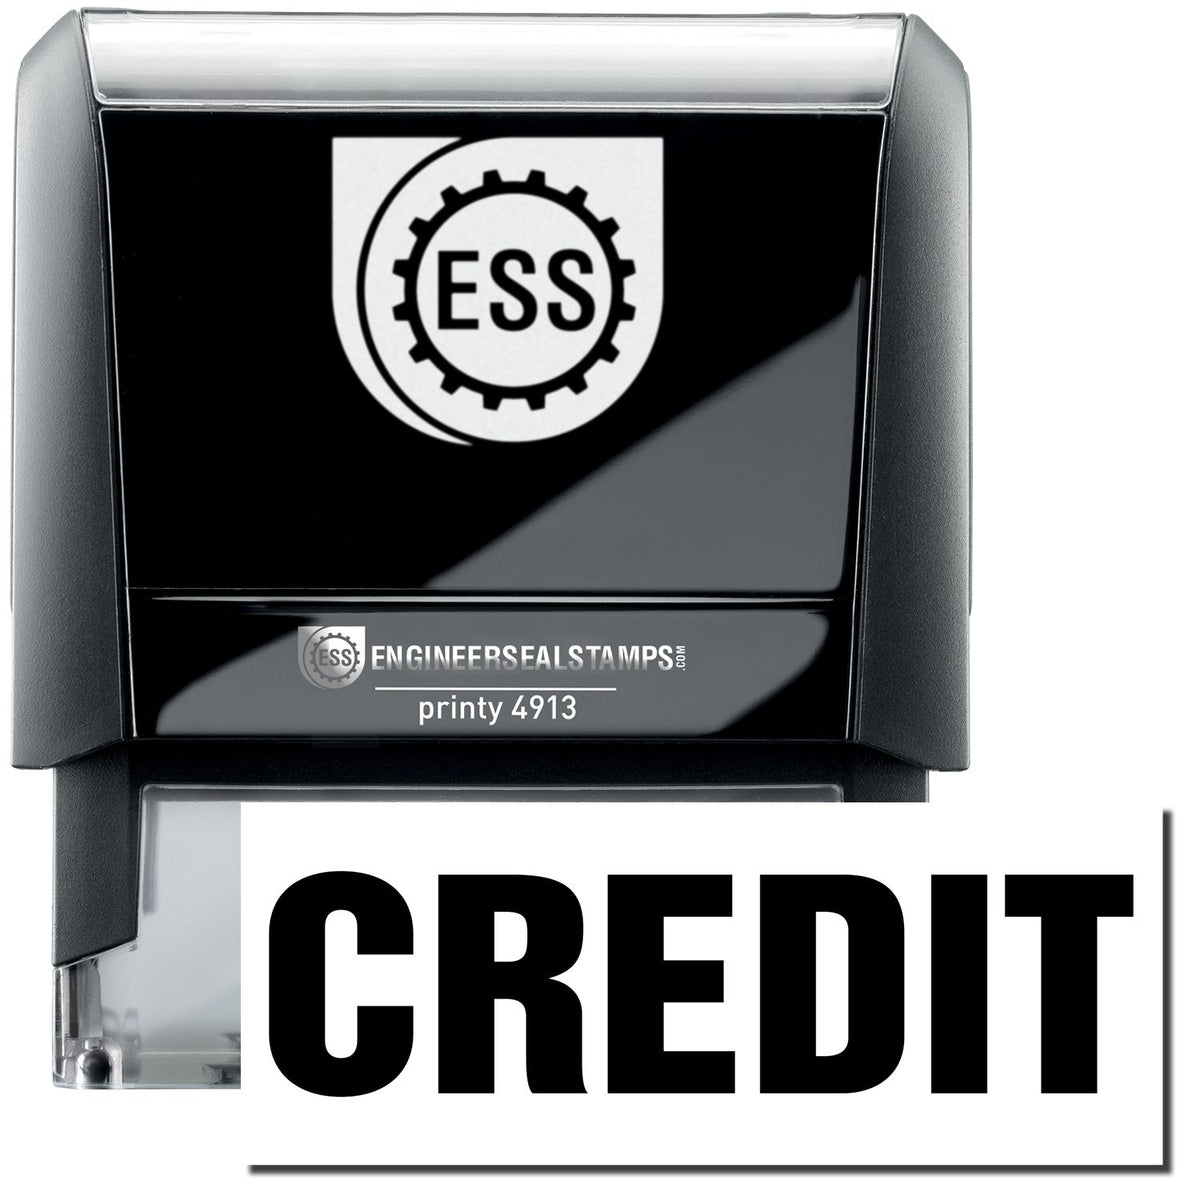 A self-inking stamp with a stamped image showing how the text &quot;CREDIT&quot; in a large bold font is displayed by it.